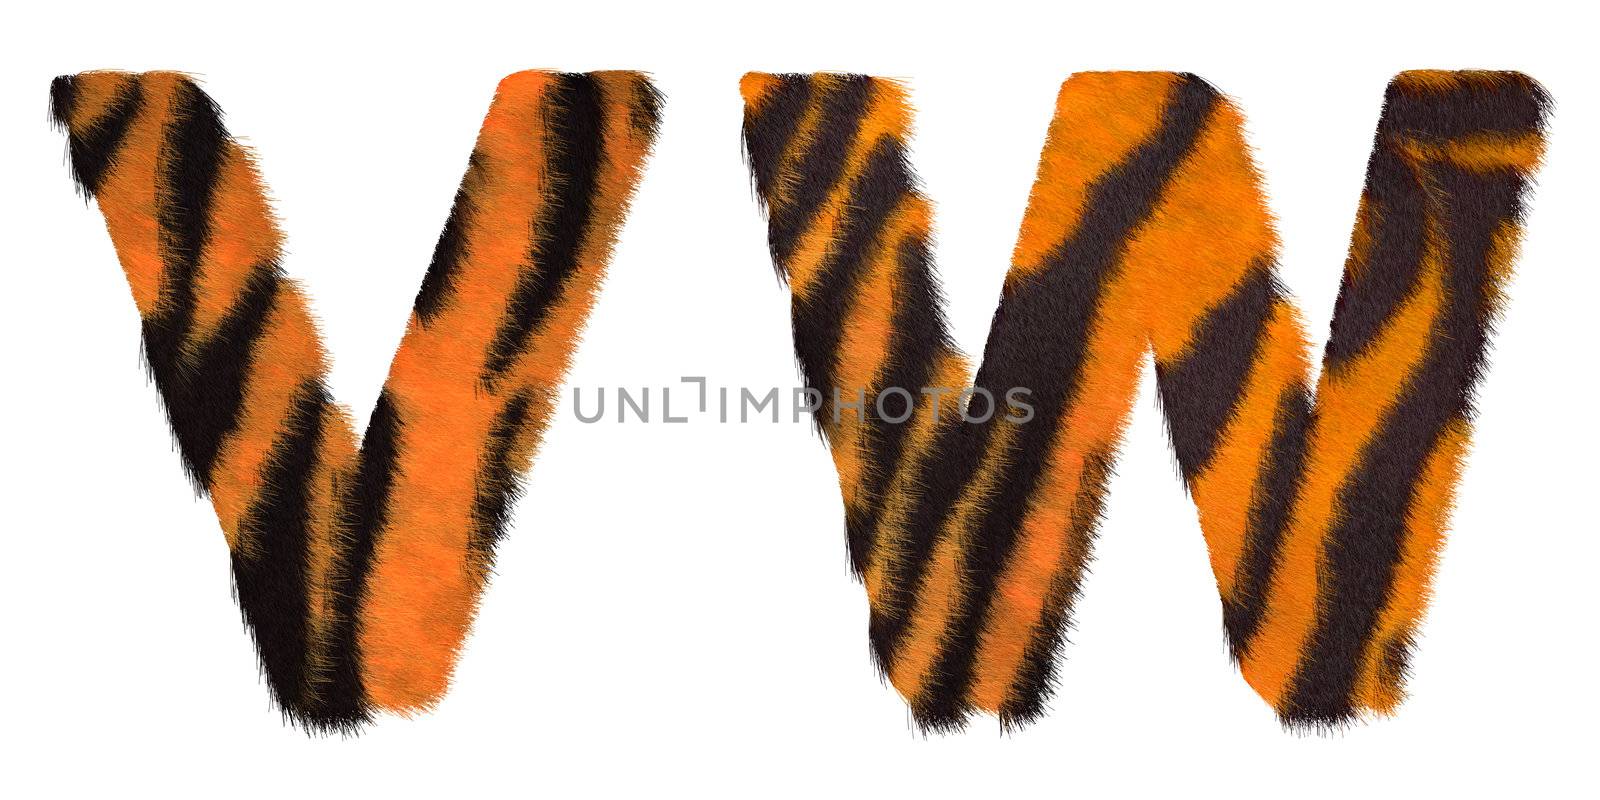 Tiger fell W and V letters isolated over white background